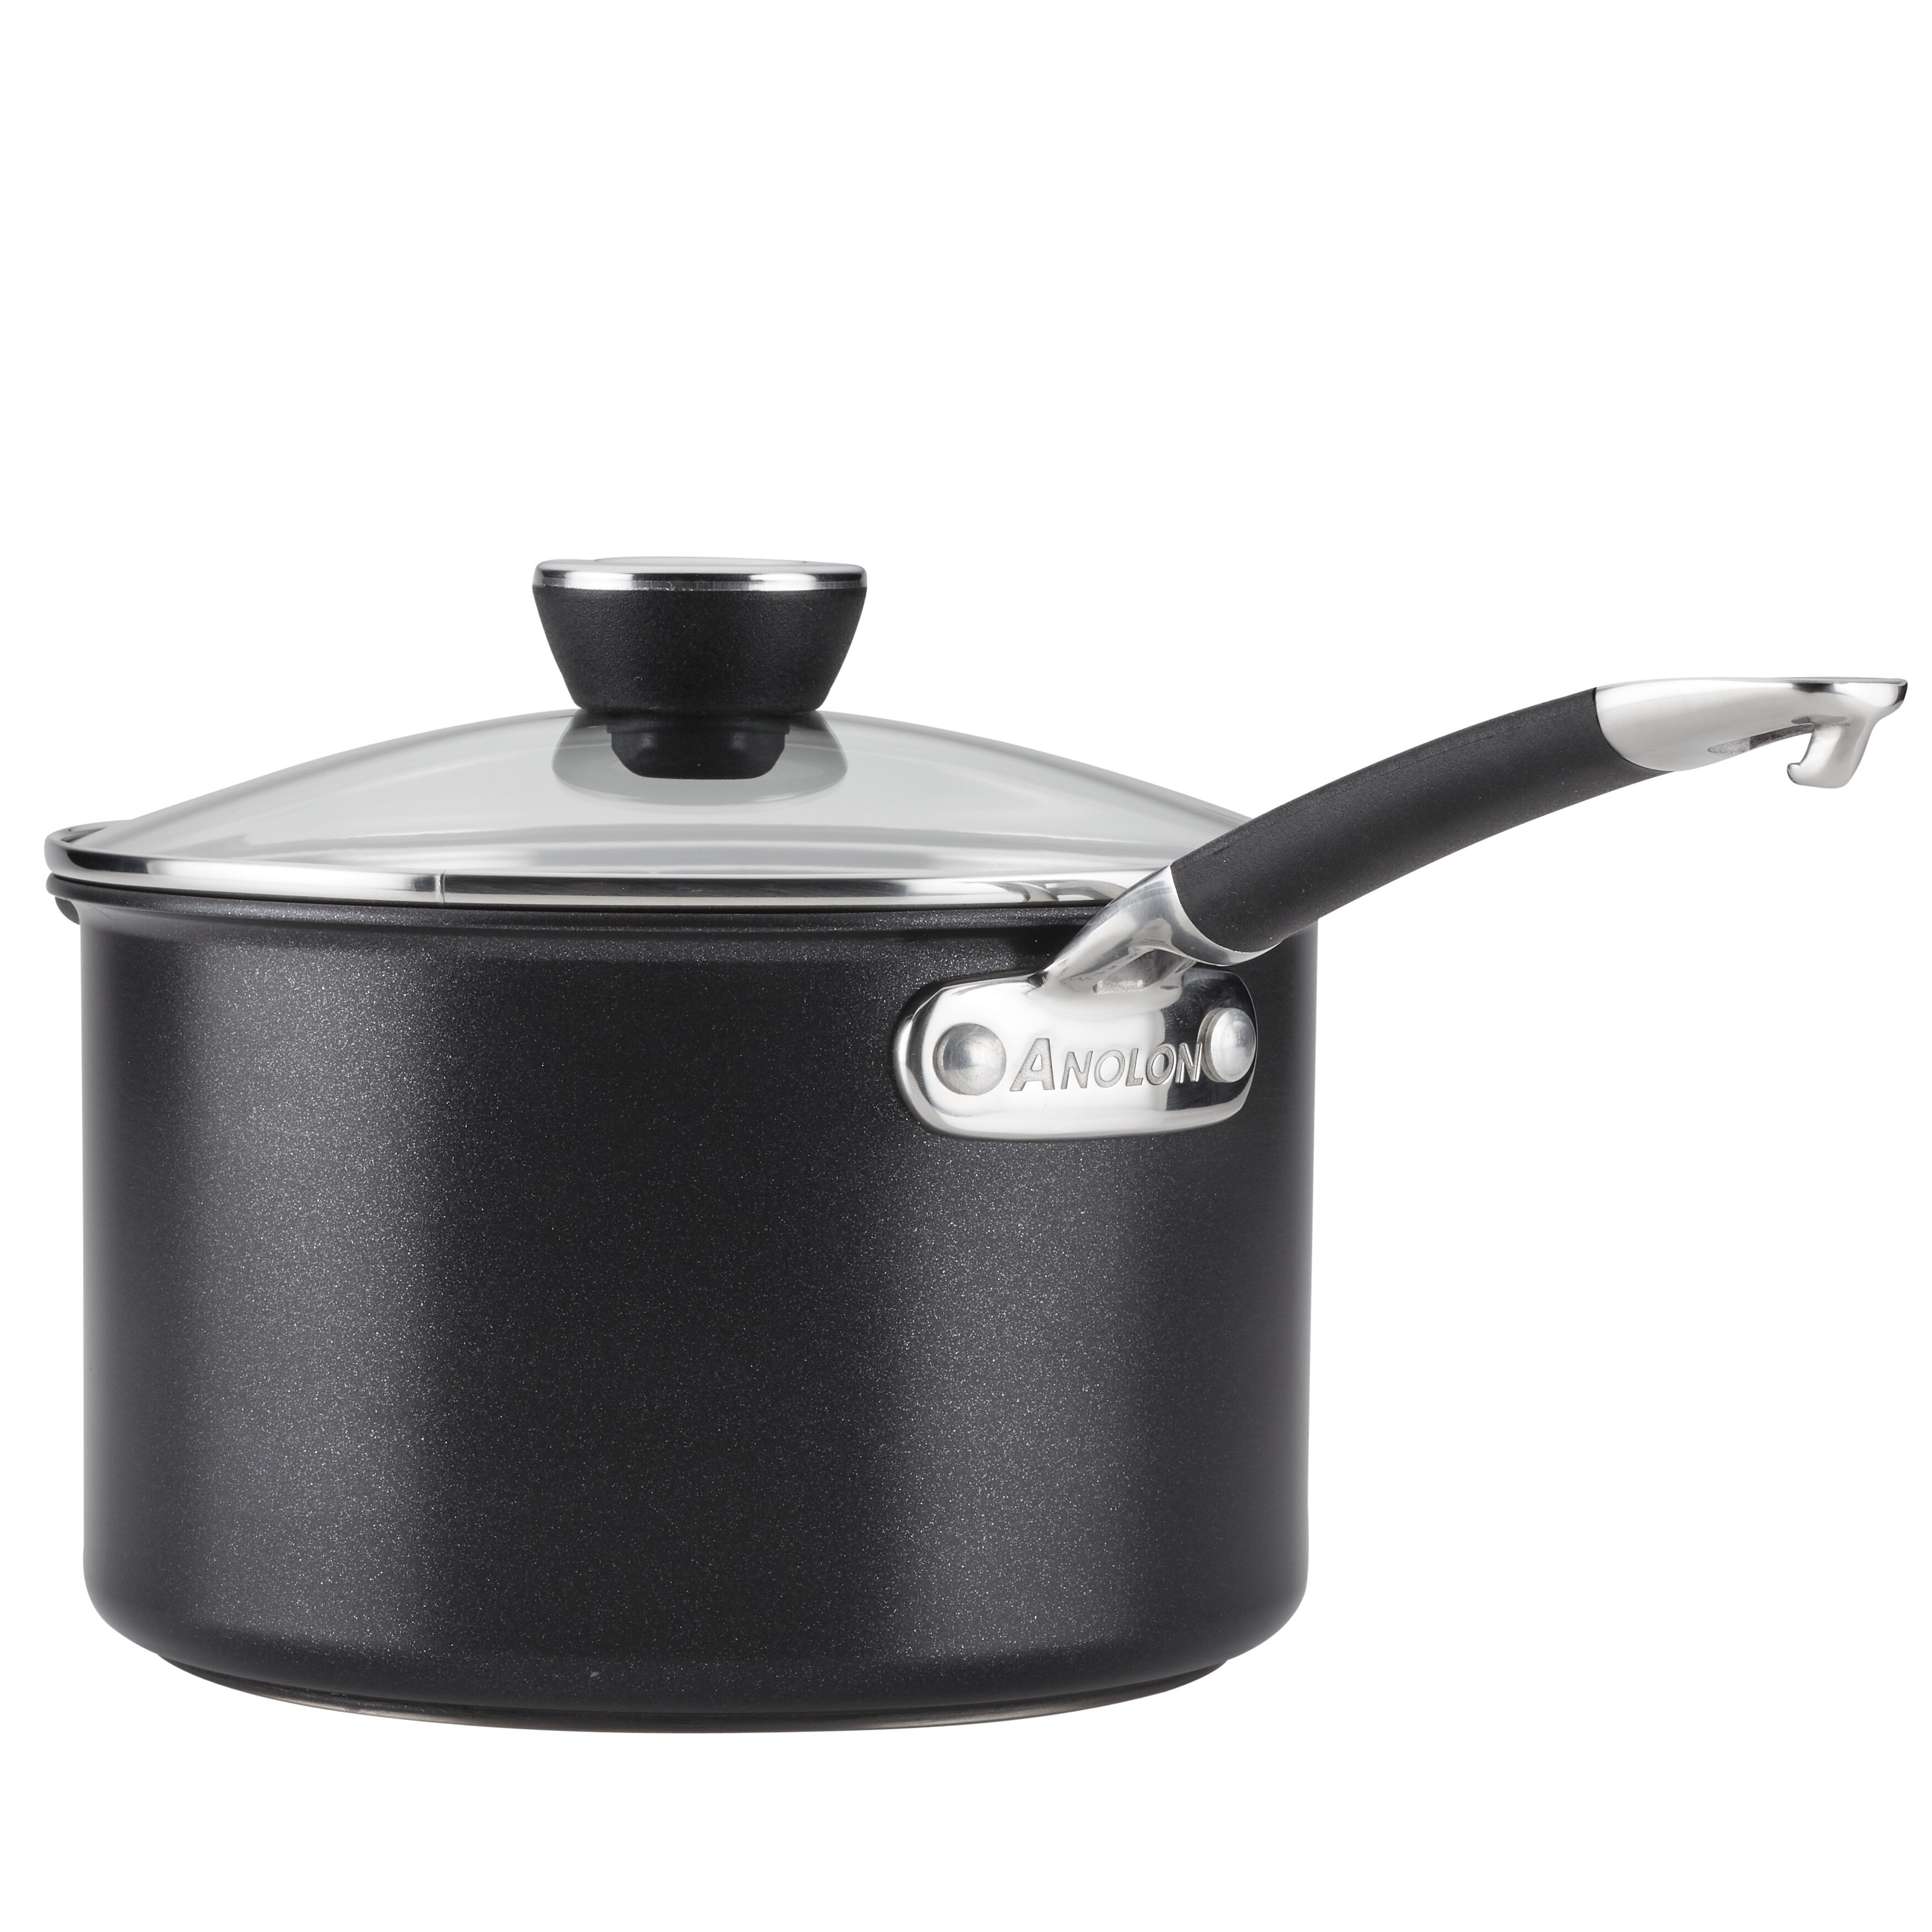 https://ak1.ostkcdn.com/images/products/is/images/direct/d71eba8bbb25a06b41adf42e73fcaaaa3ad63f36/Anolon-SmartStack-Hard-Anodized-Nonstick-Induction-Cookware-Pots-and-Pans-Set%2C-11-Piece%2C-Black.jpg